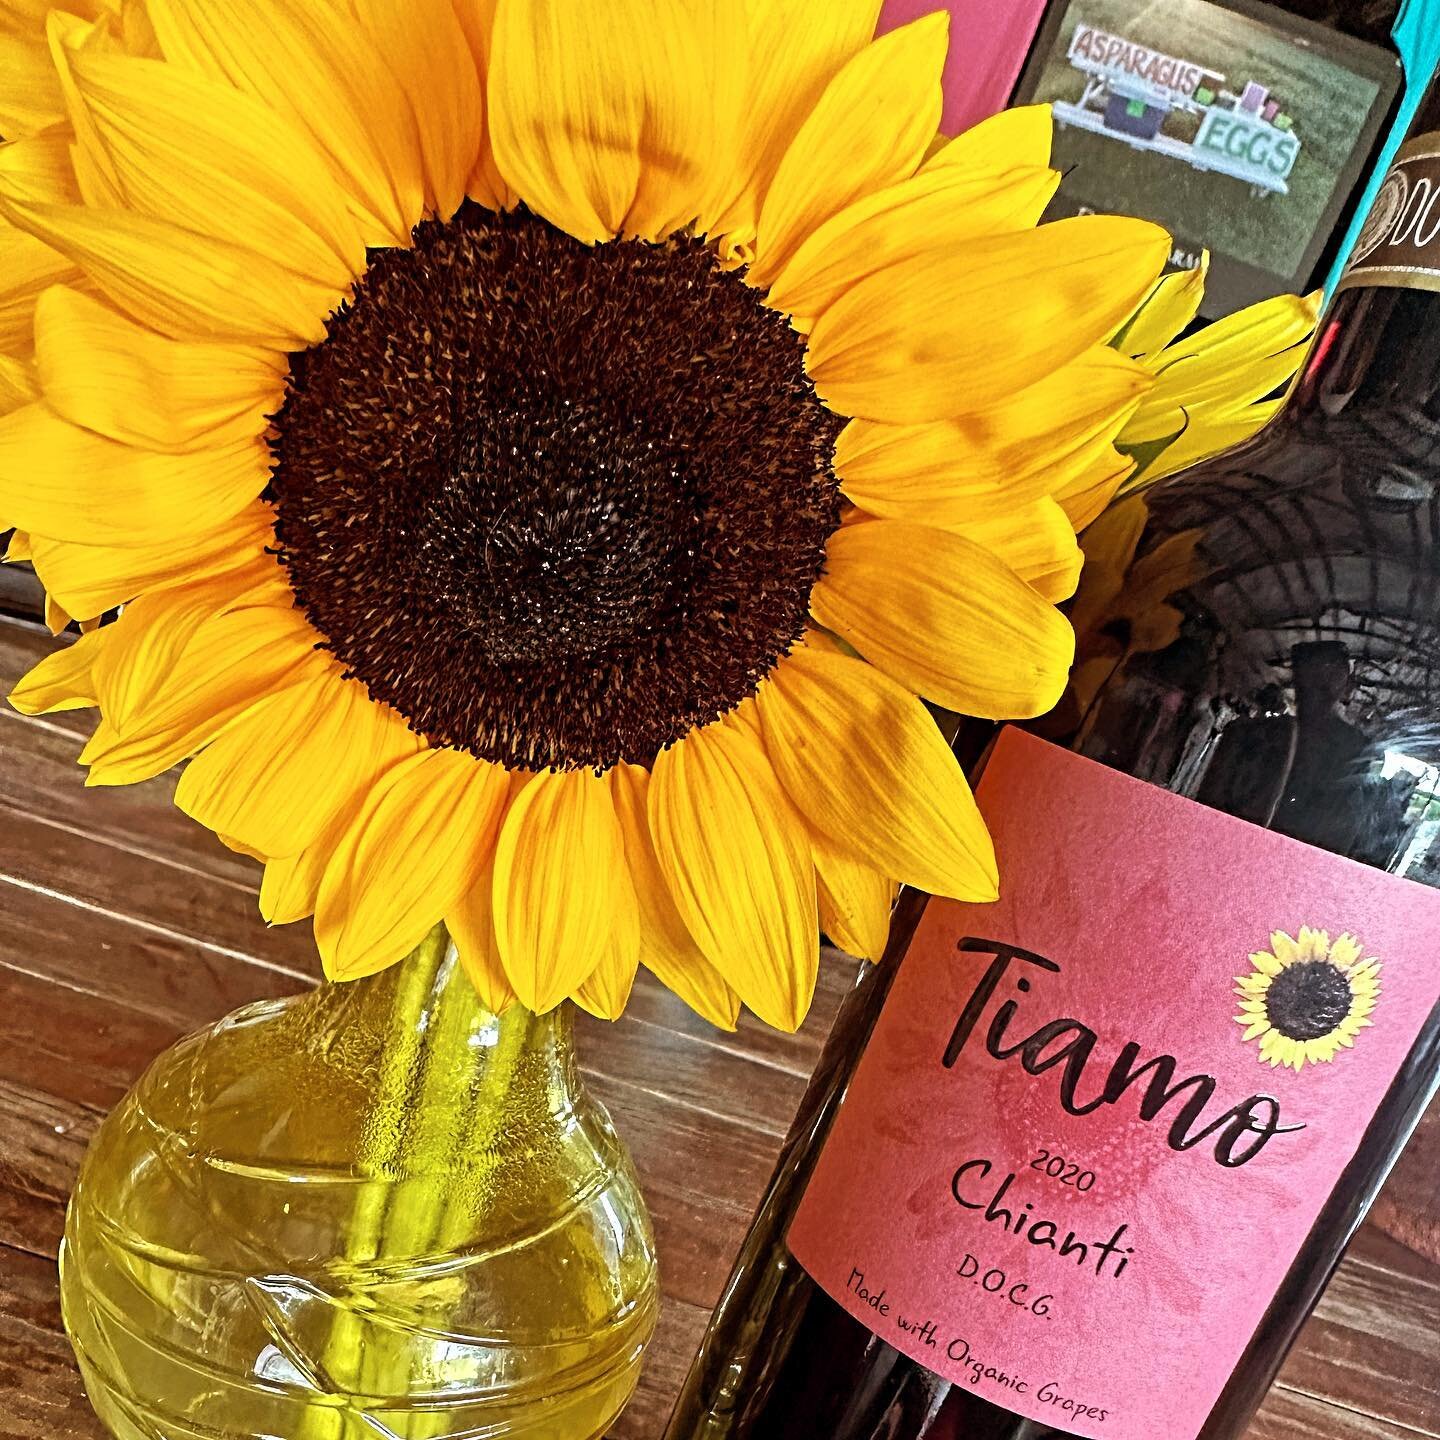 🌻 Buy a bottle of Tiamo Chianti, get 10 free sunflowers!! 🌻

🍷 Fresh flowers and wine are the perfect hostess gift! 💐

🍇 Made with organic grapes, &ldquo;Tiamo single vineyard Chianti is a superbly balanced wine with aromas of red fruits and vio